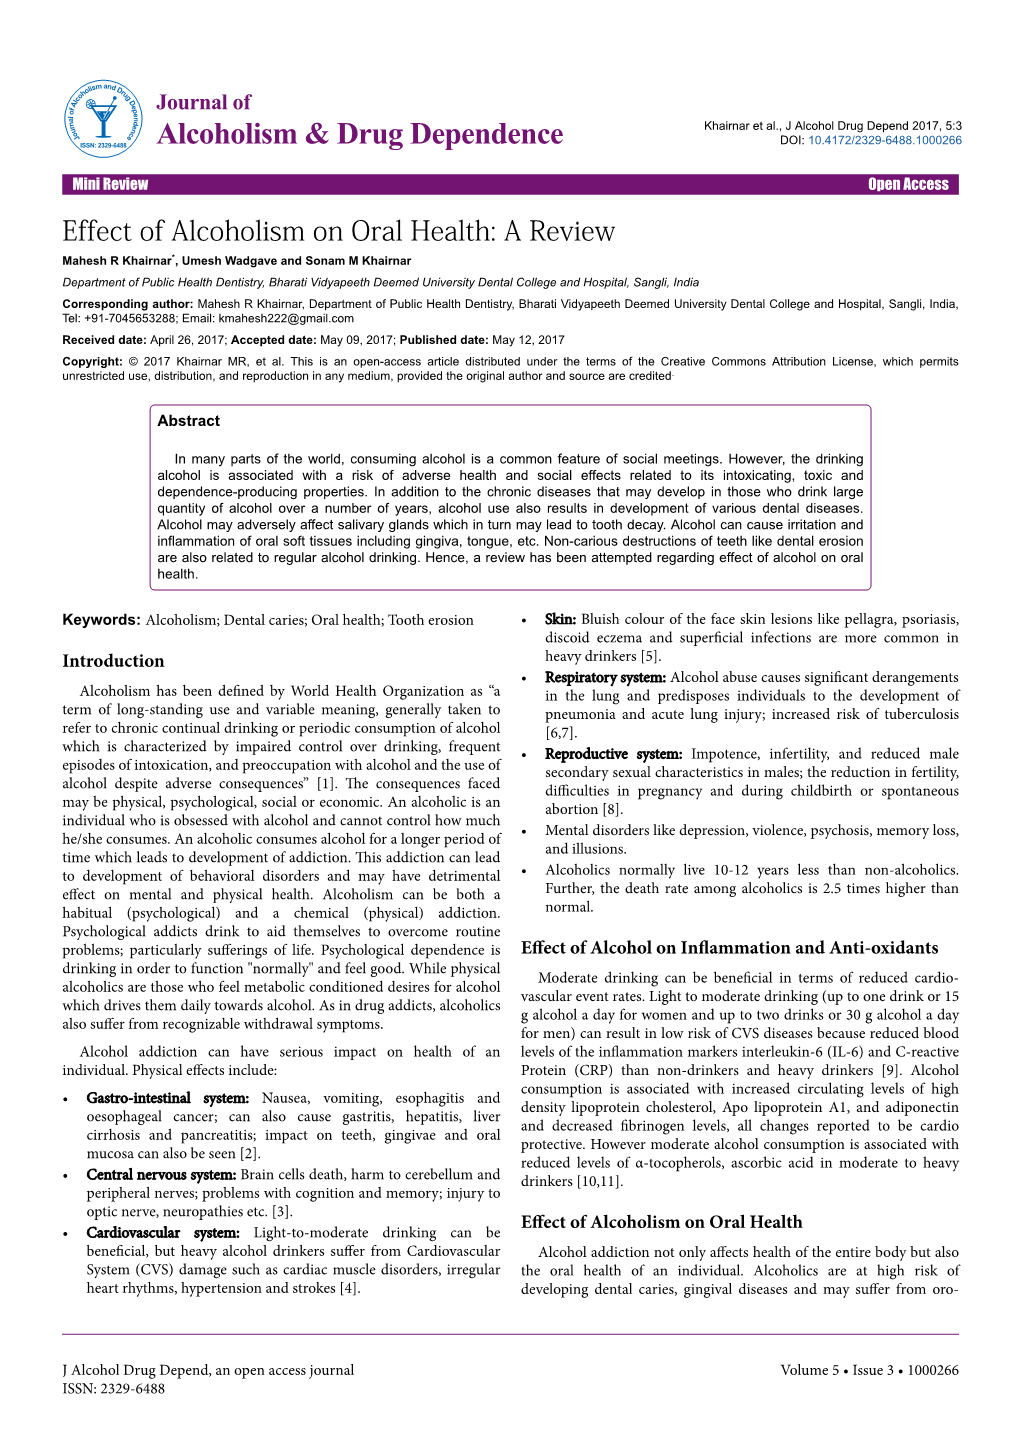 Effect of Alcoholism on Oral Health: a Review